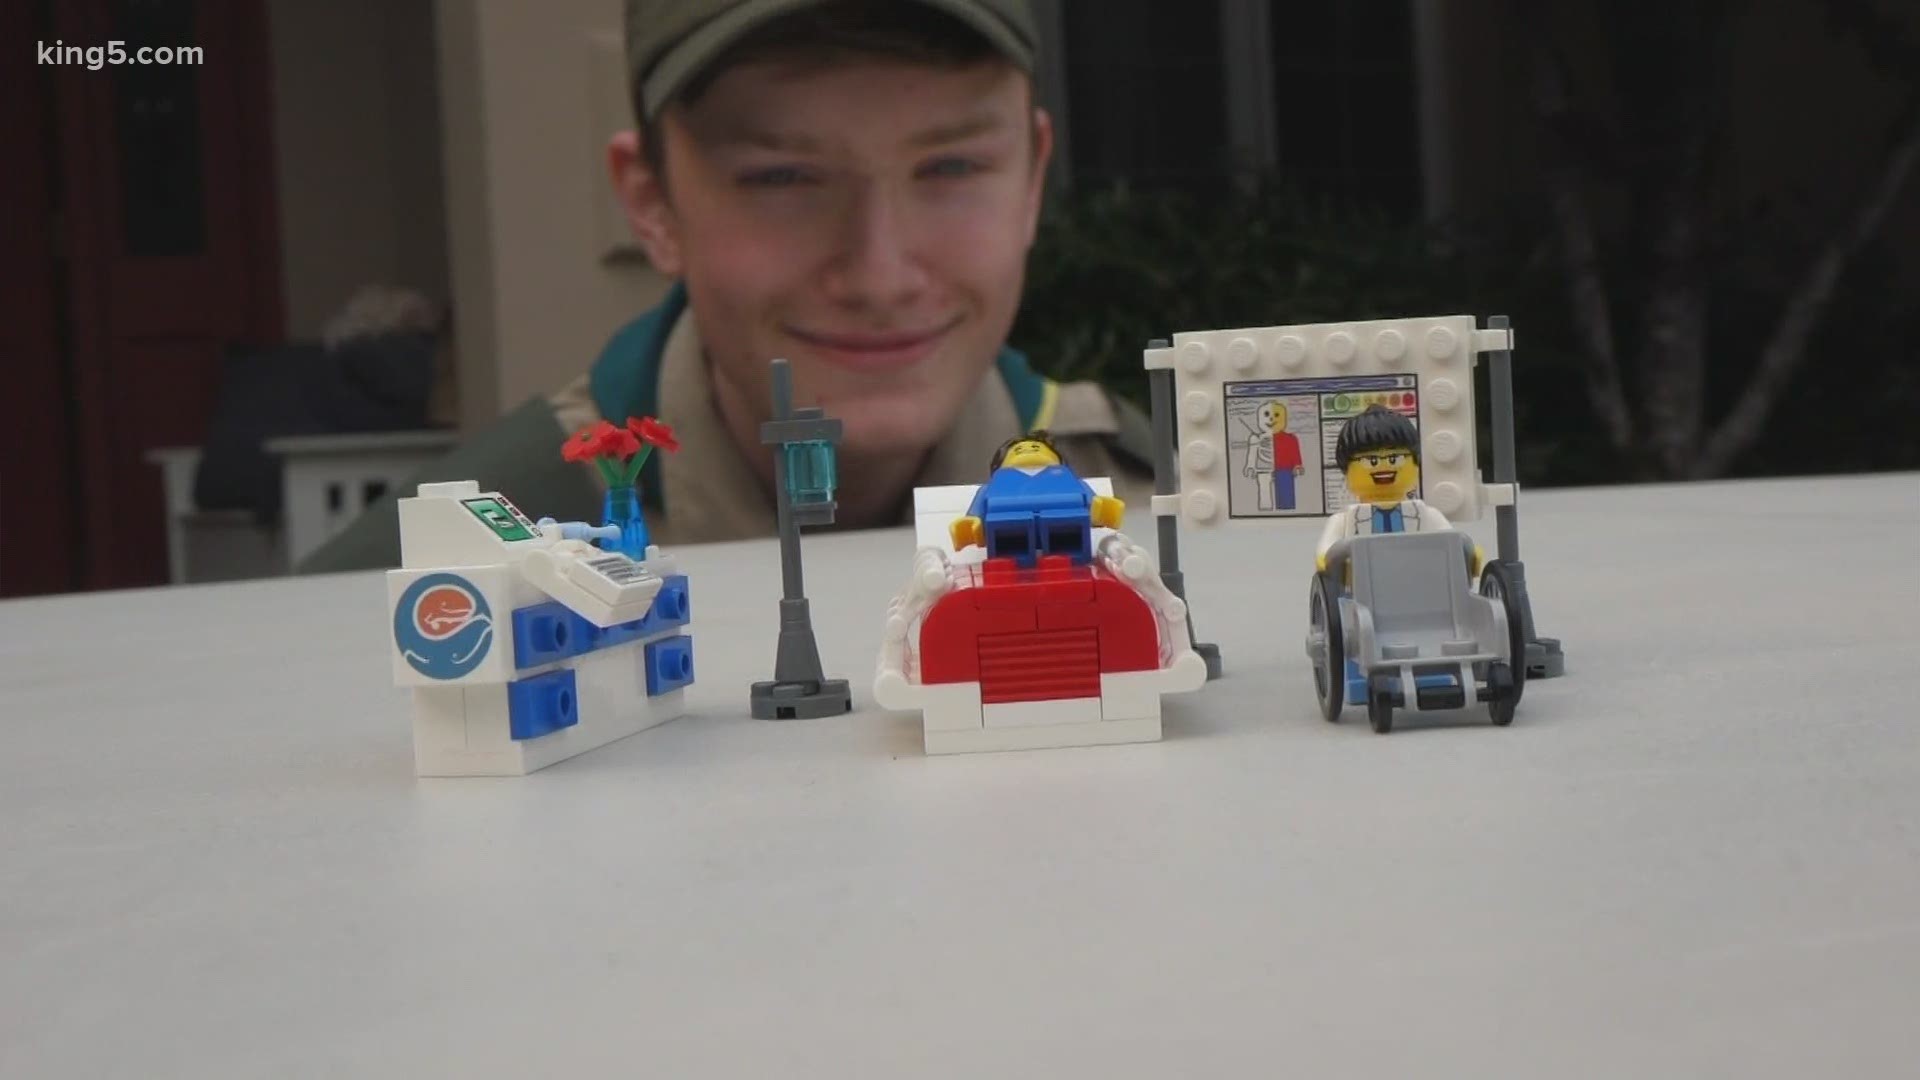 After his sister had cancer treatment at Seattle Children's, Jack Haines set out to make customized LEGO kits of the hospital to make it less scary for other kids.